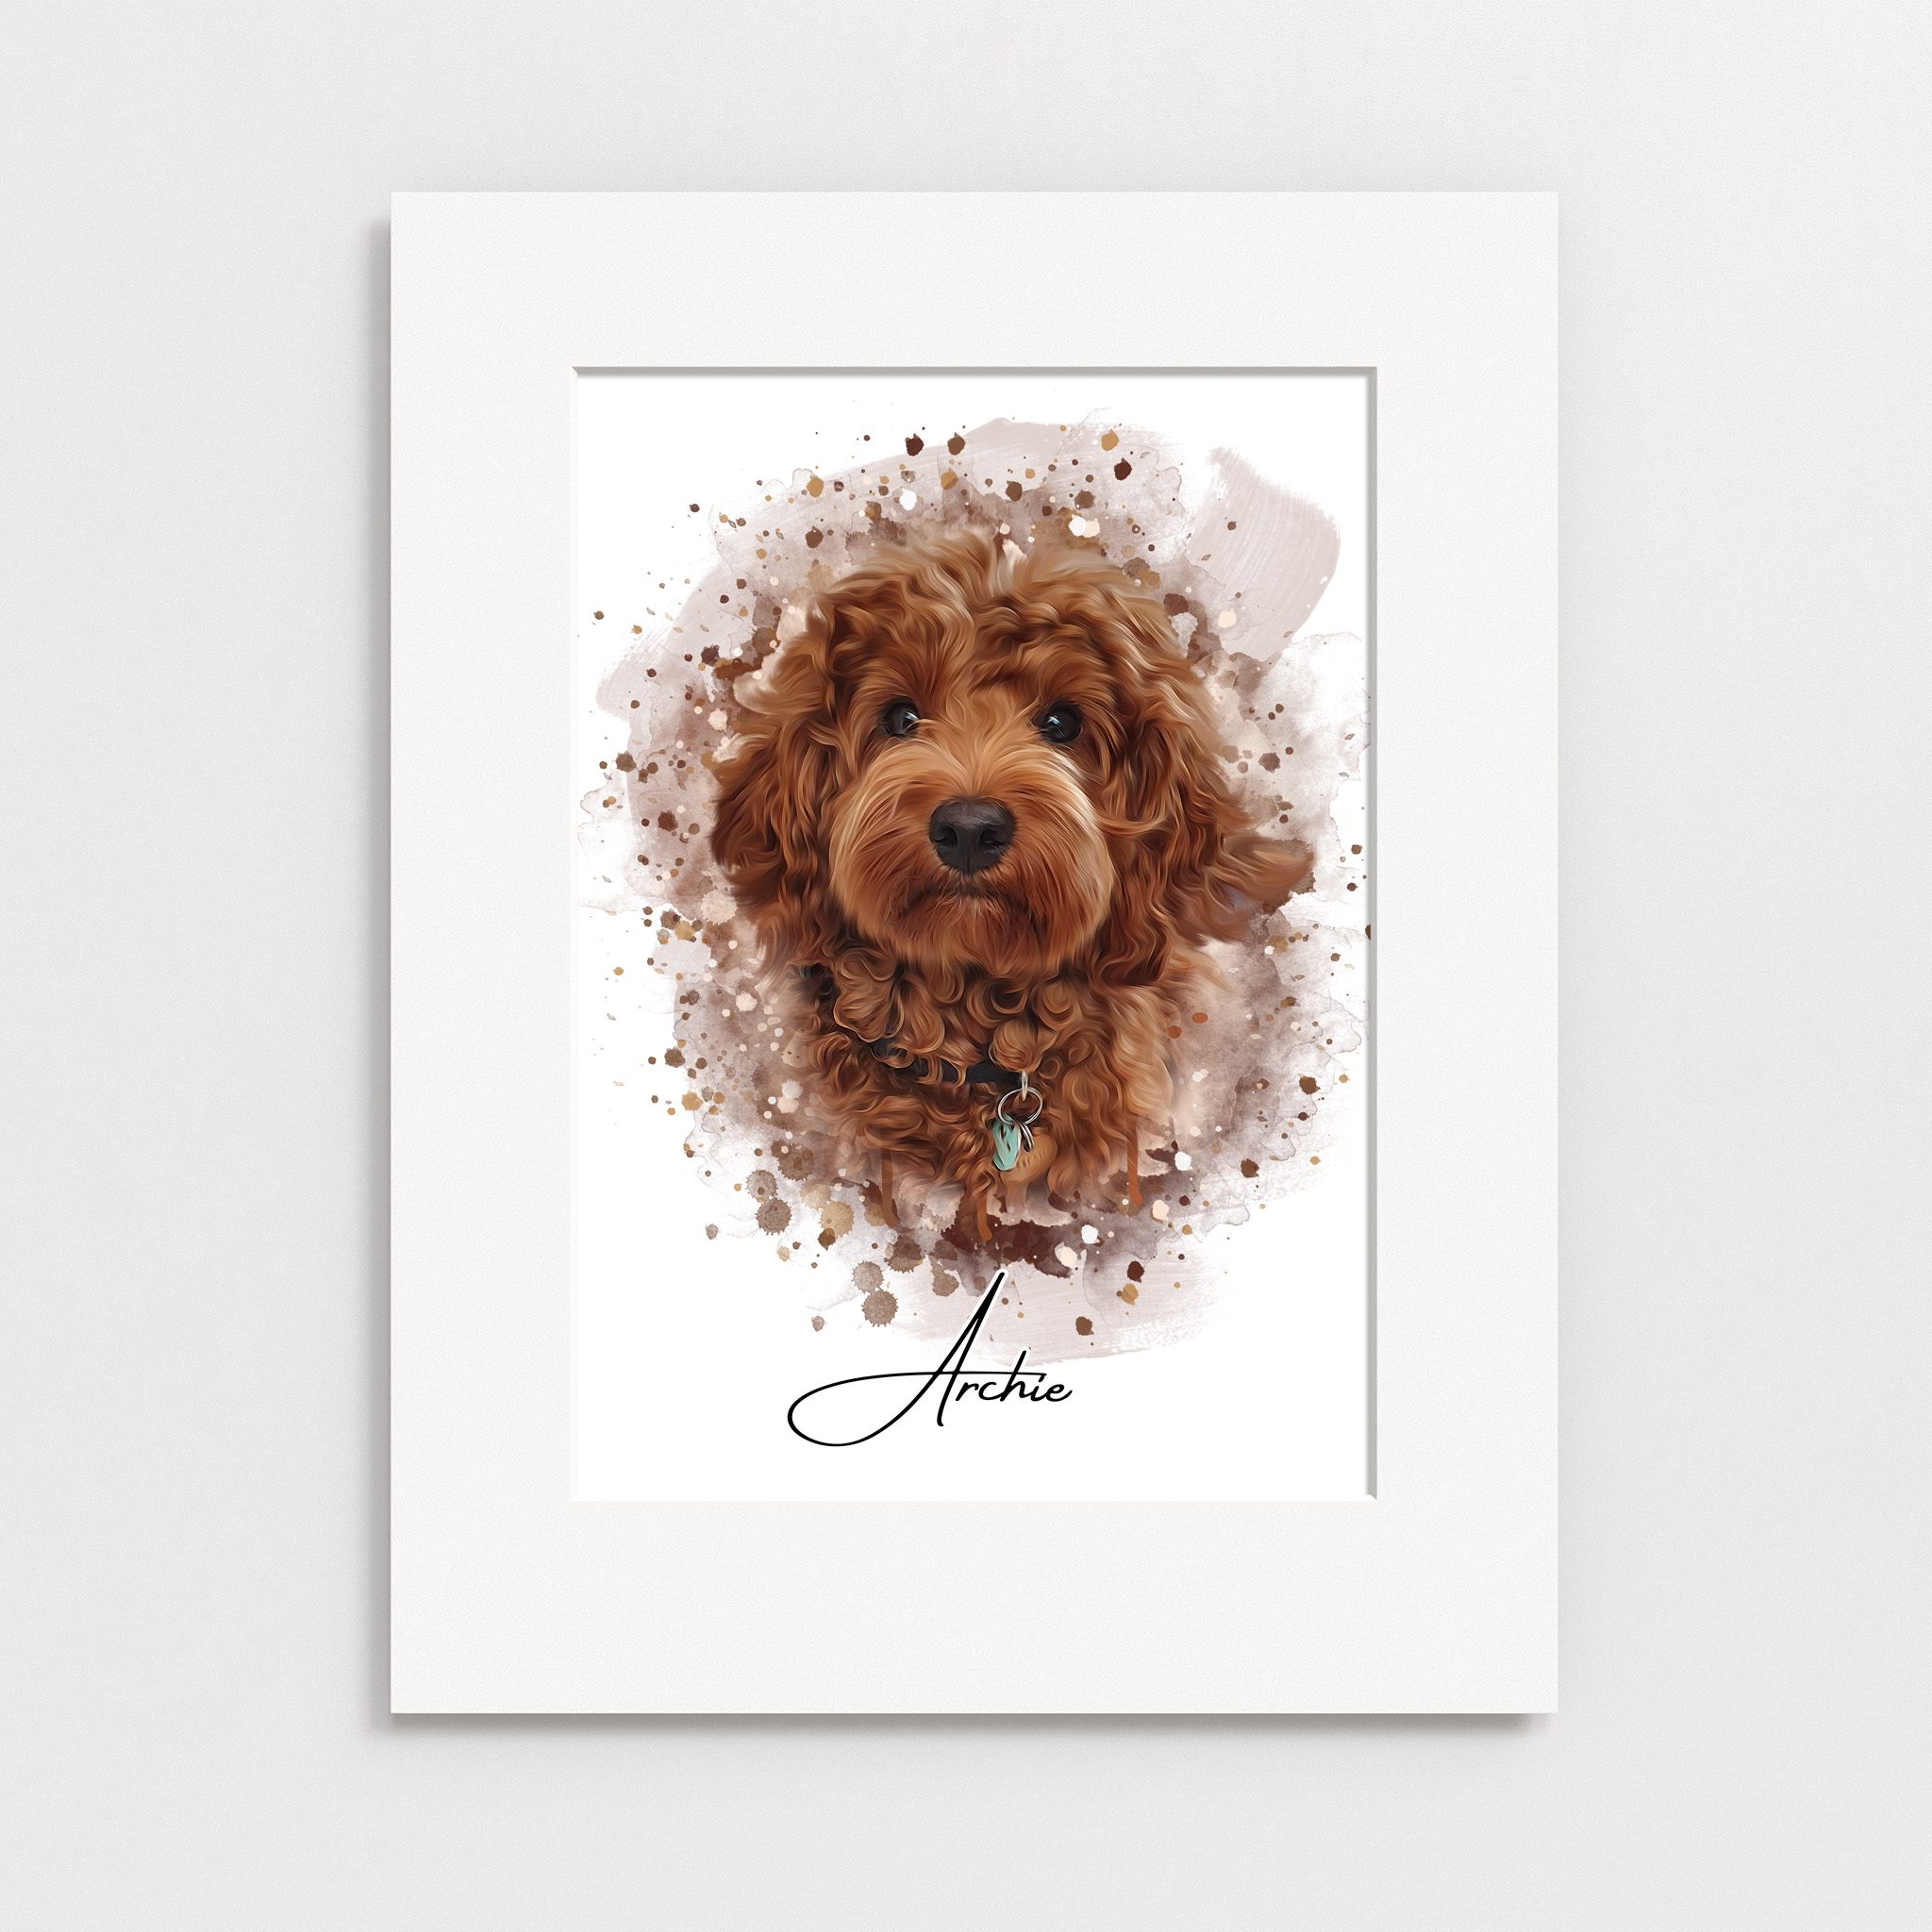 Your pet drawn as a watercolour image and printed as a black framed mounted poster print